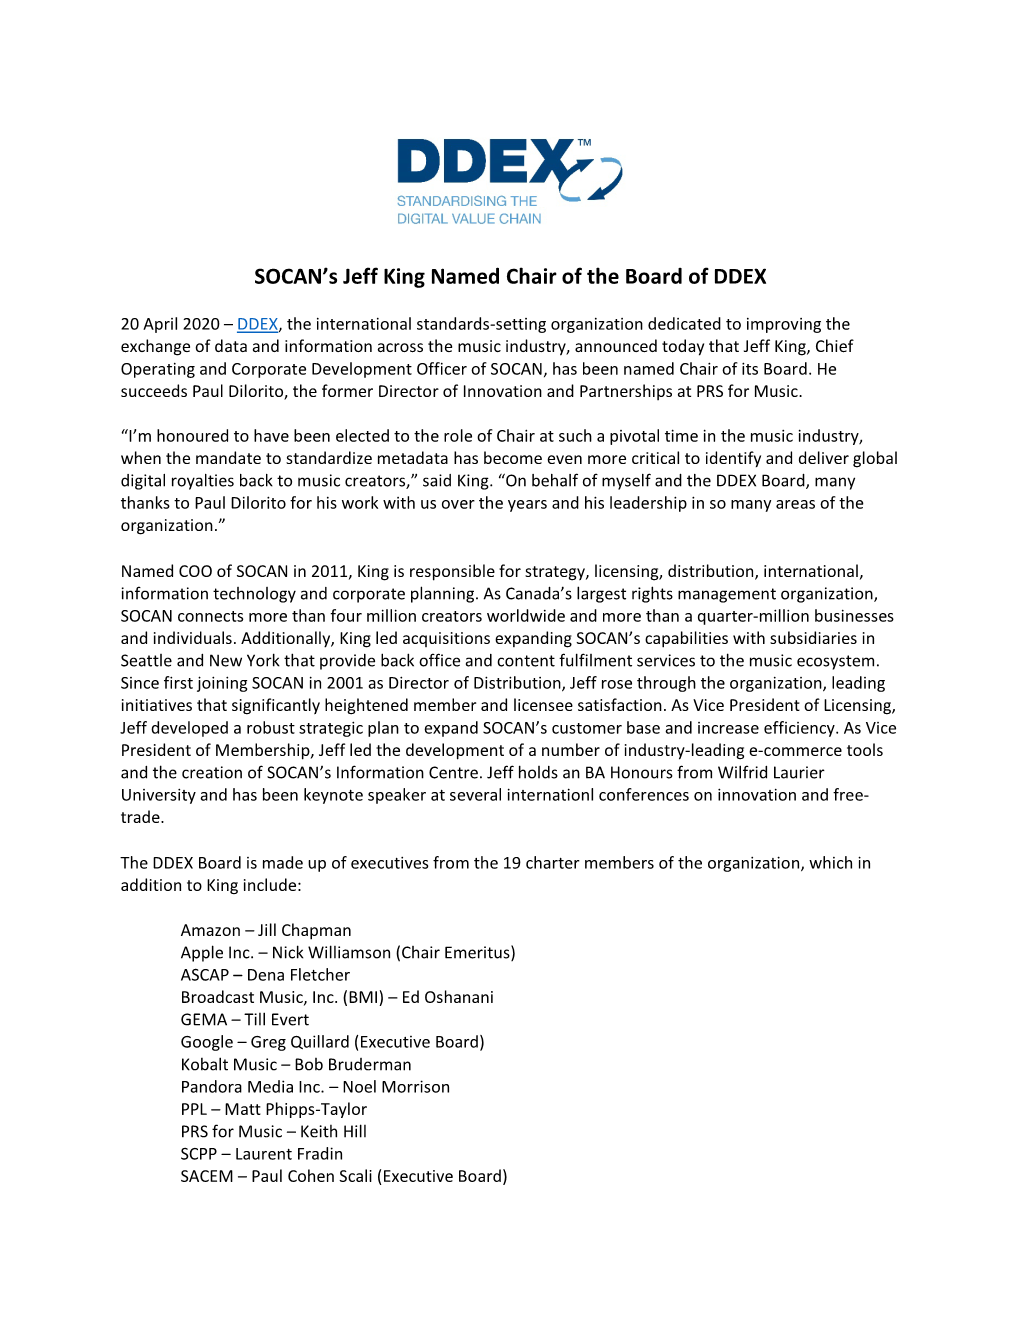 SOCAN's Jeff King Named Chair of the Board of DDEX